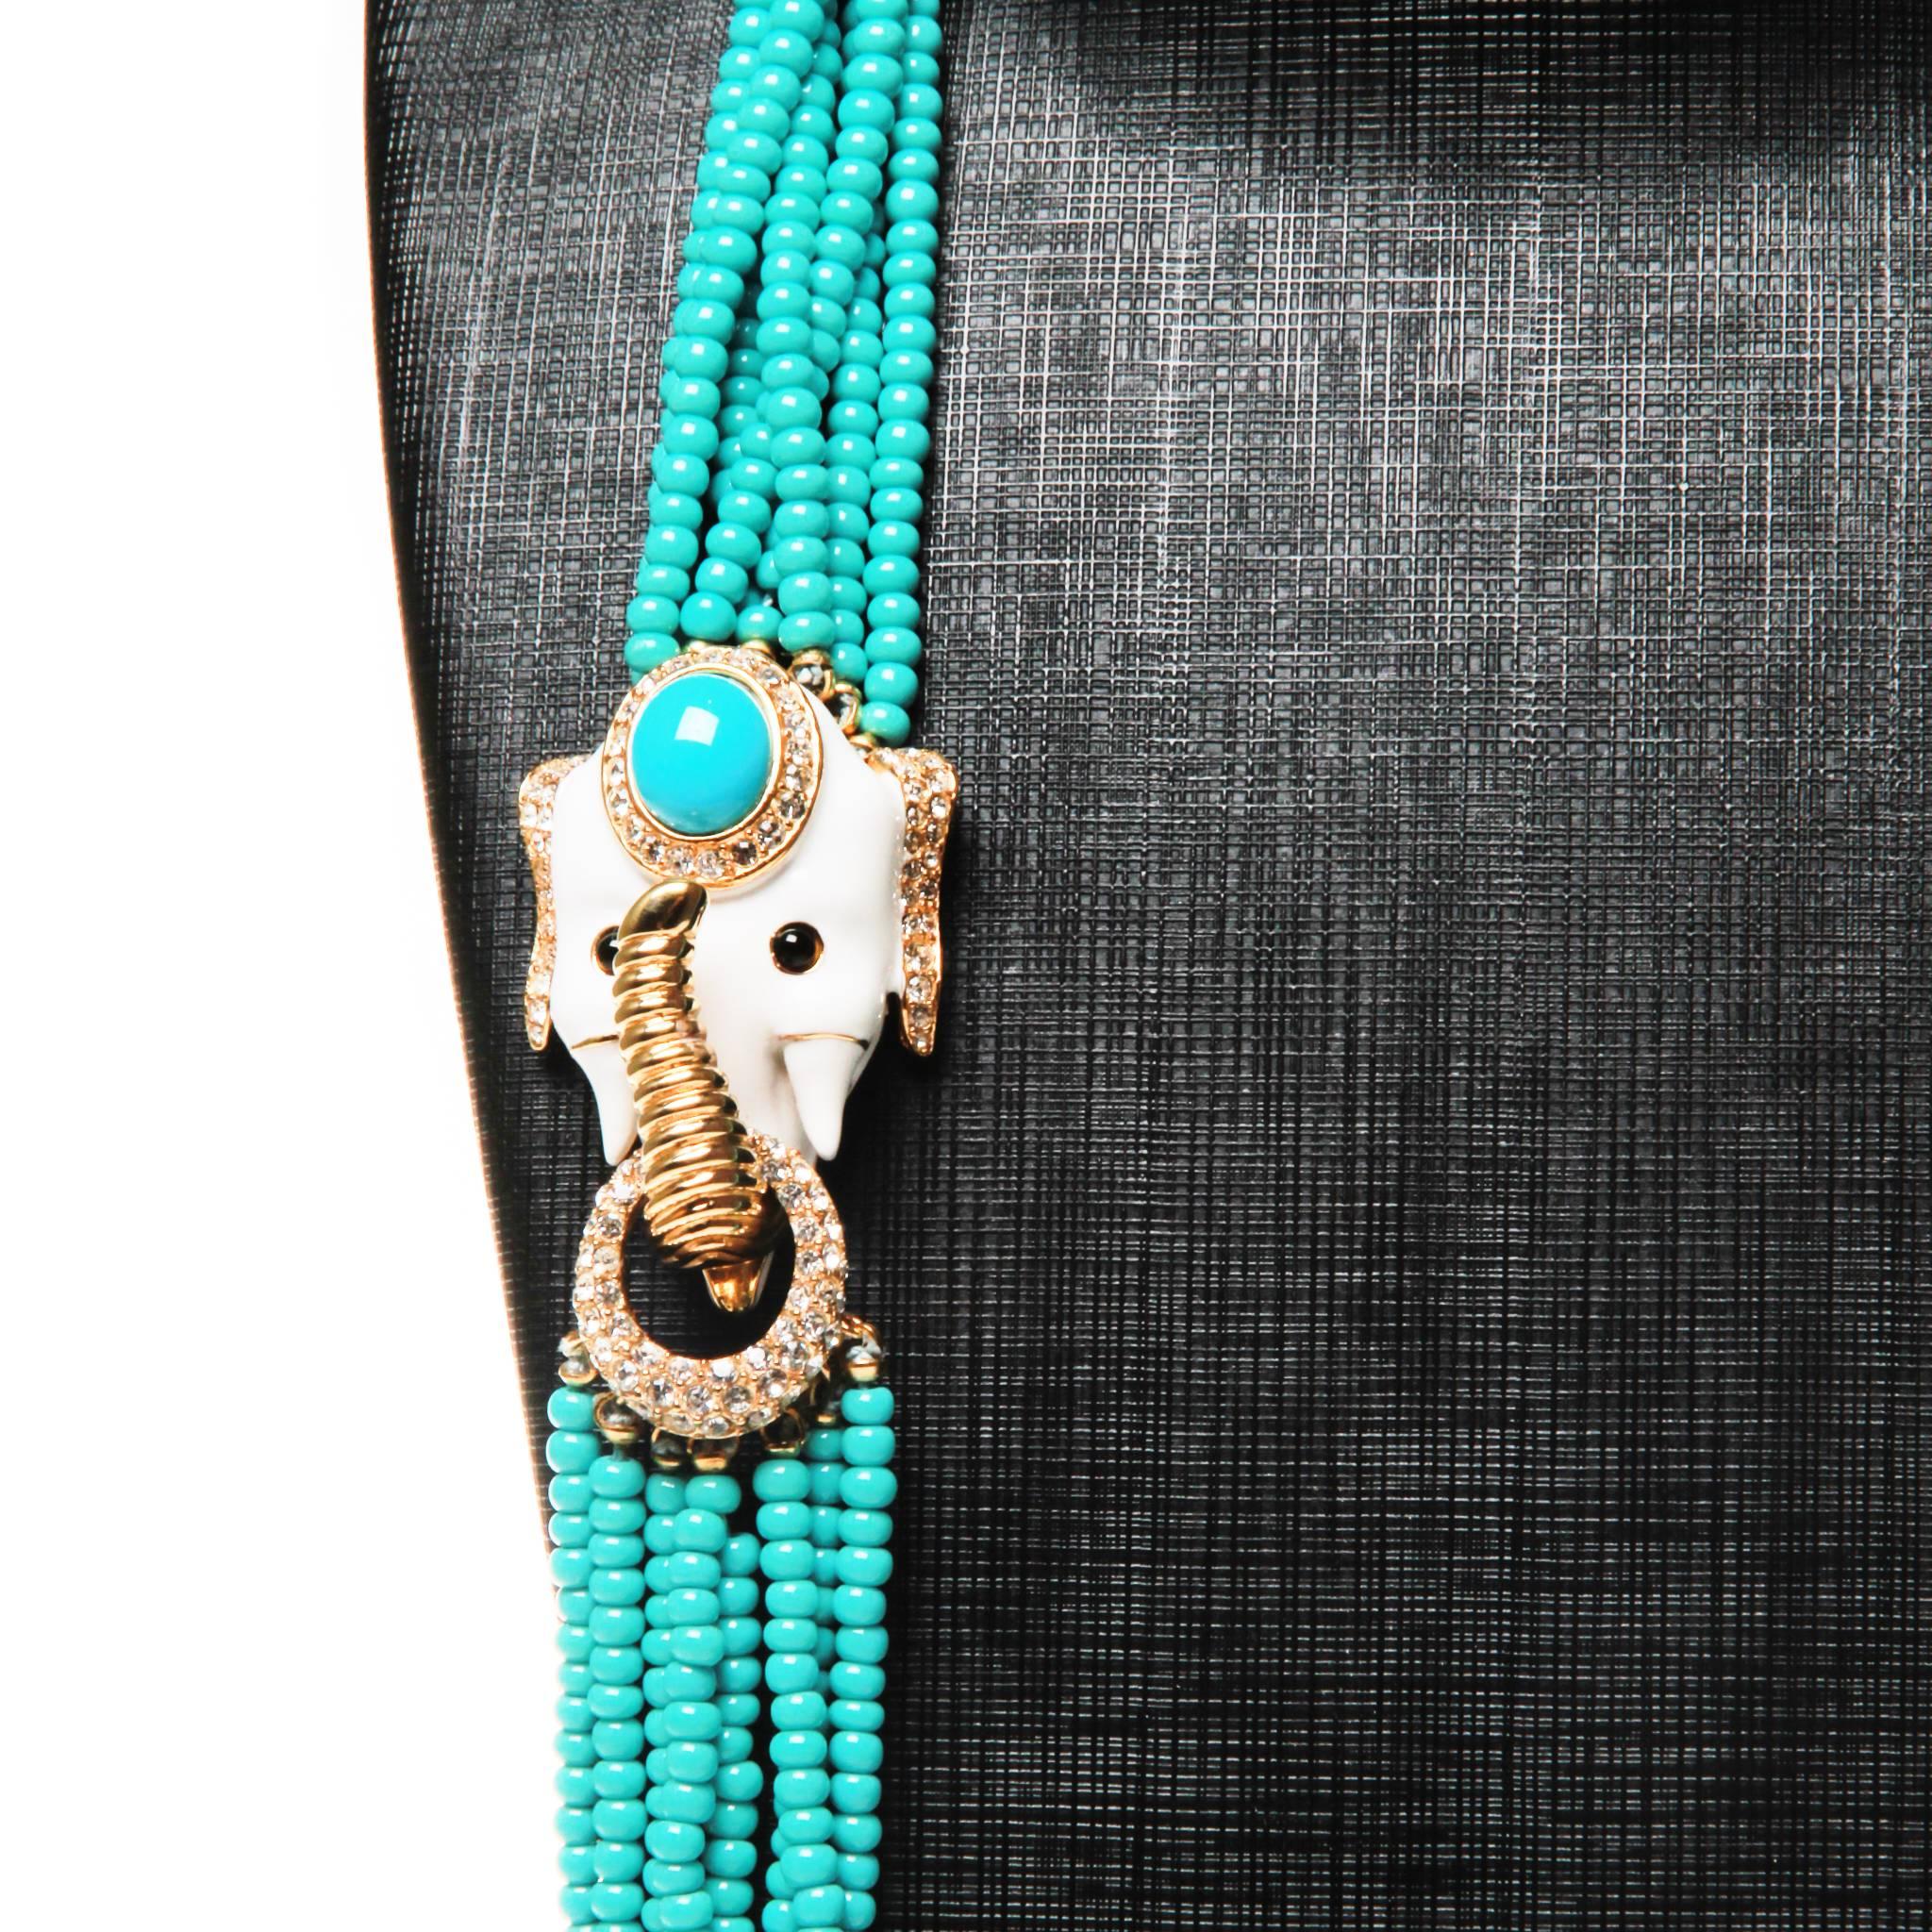 Women's or Men's Ciner Turquoise Glass Torsade Necklace with Crystal White Enamel Elephant Clasp